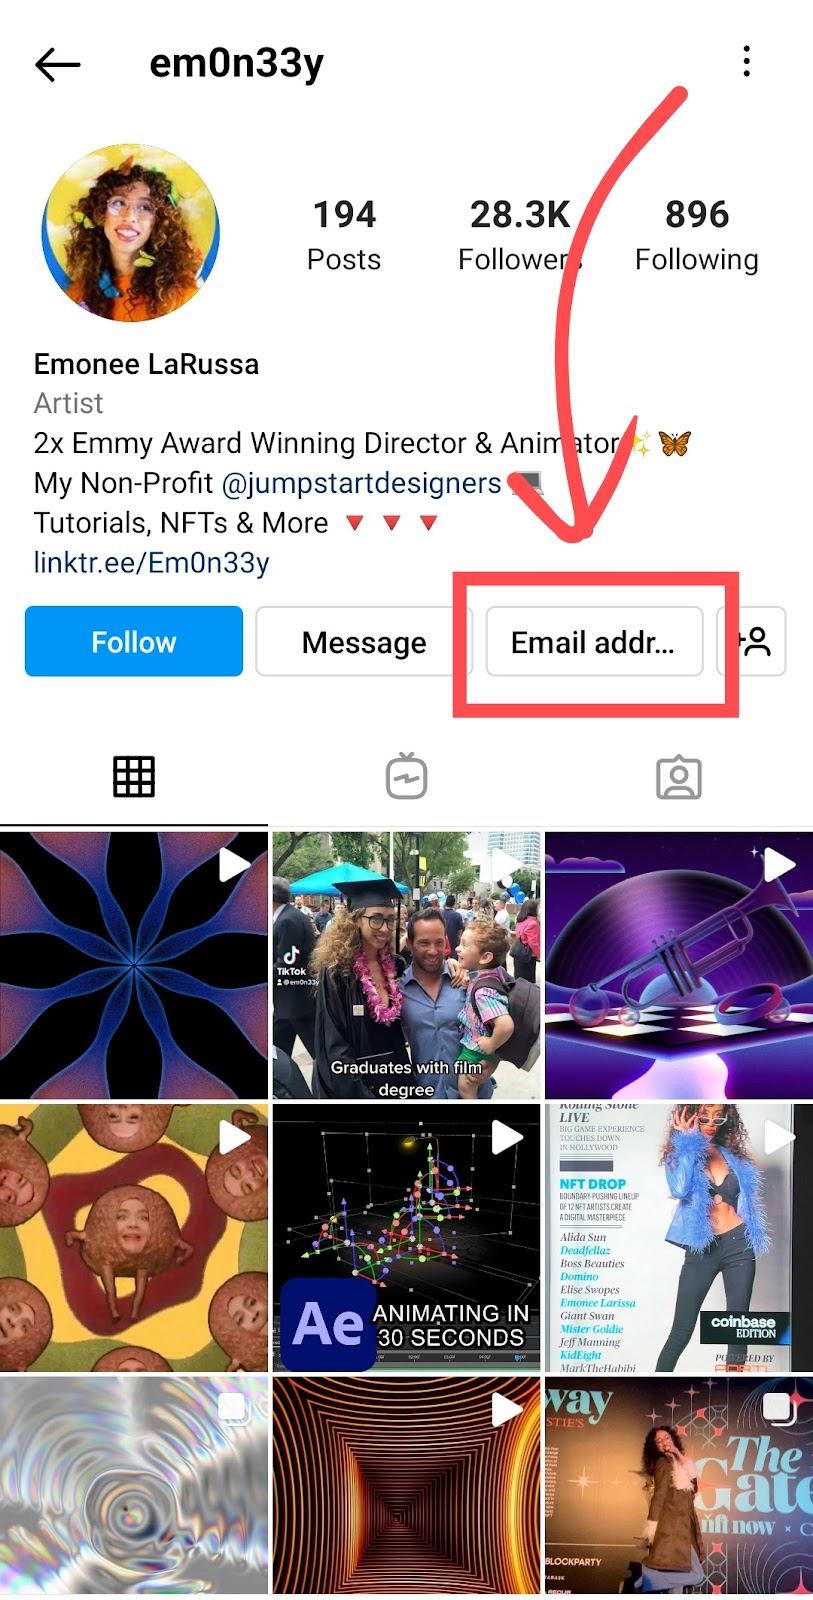 An image highlighting the email button on an Instagram profile